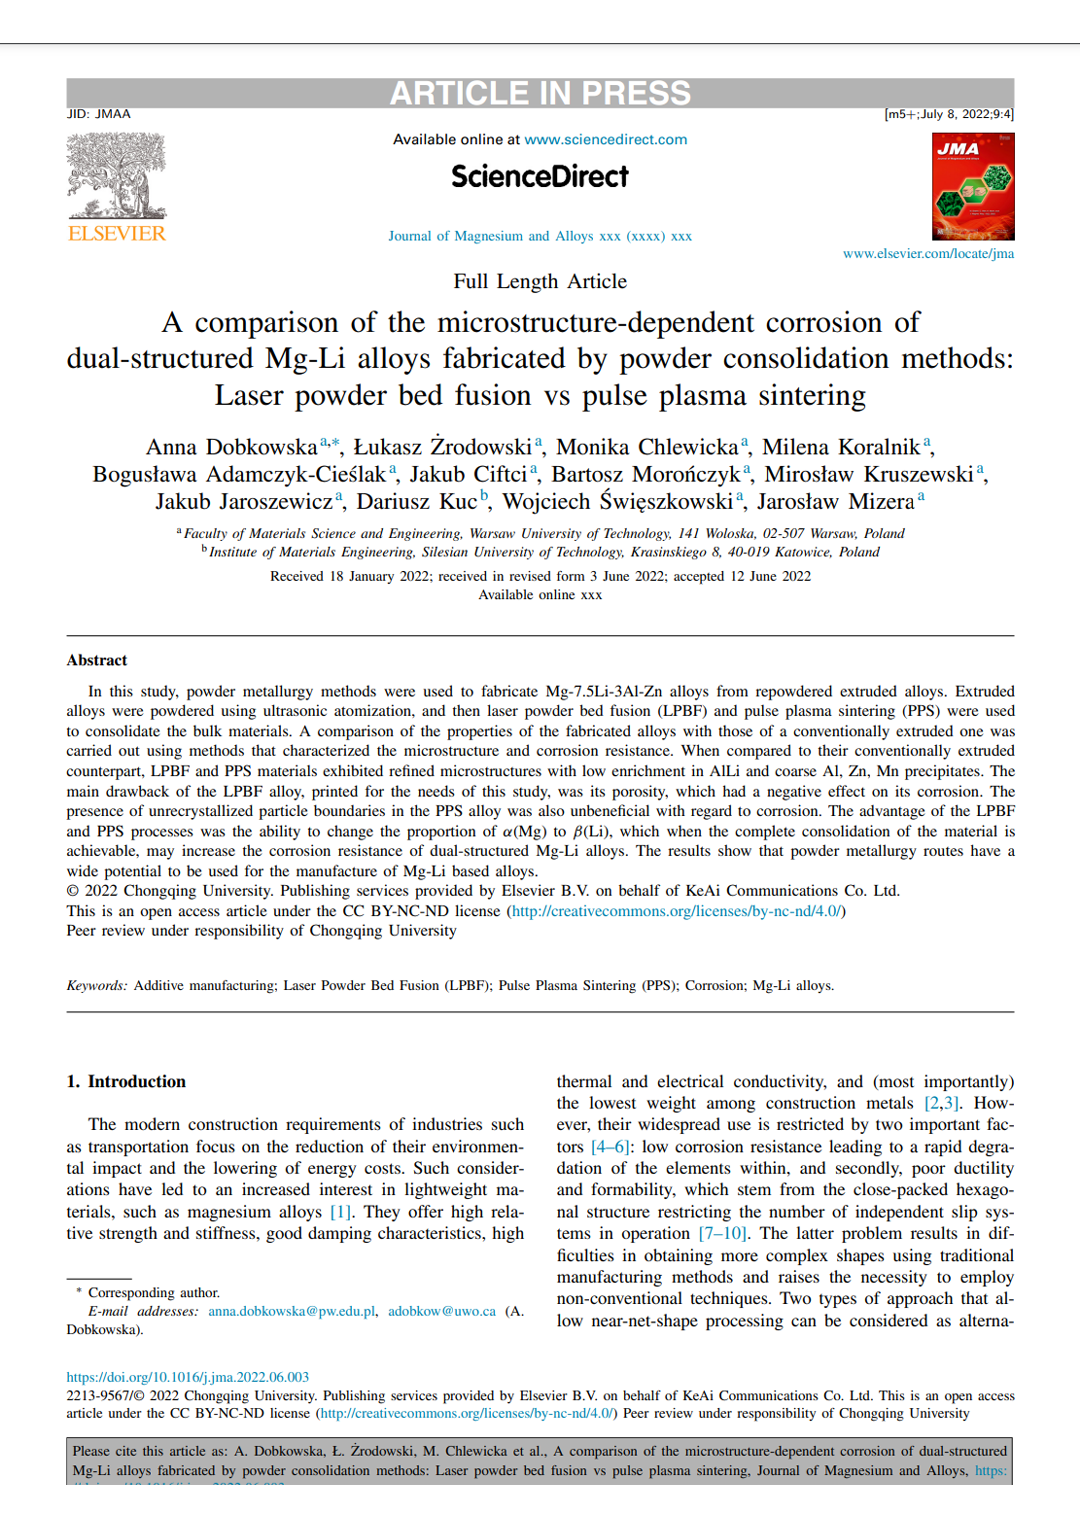 A comparison of the microstructure-dependent corrosion of dual-structured Mg-Li alloys fabricated by powder consolidation methods: Laser powder bed fusion vs pulse plasma sintering